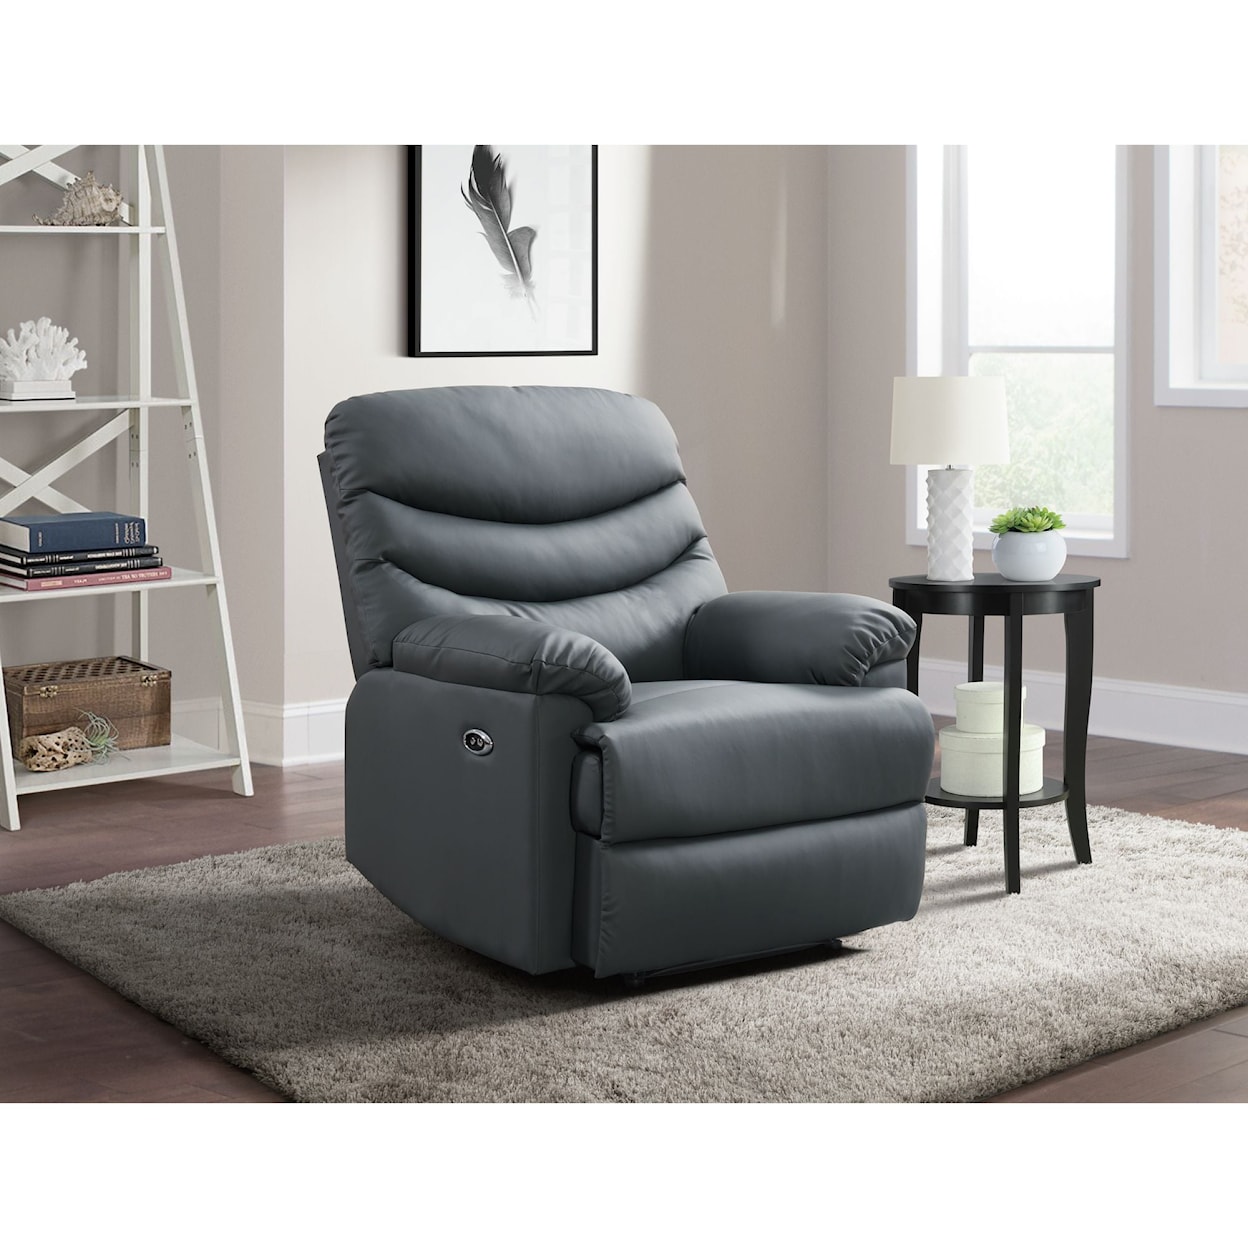 Elements International Palmdale Power Motion Recliner with Pillow Arms